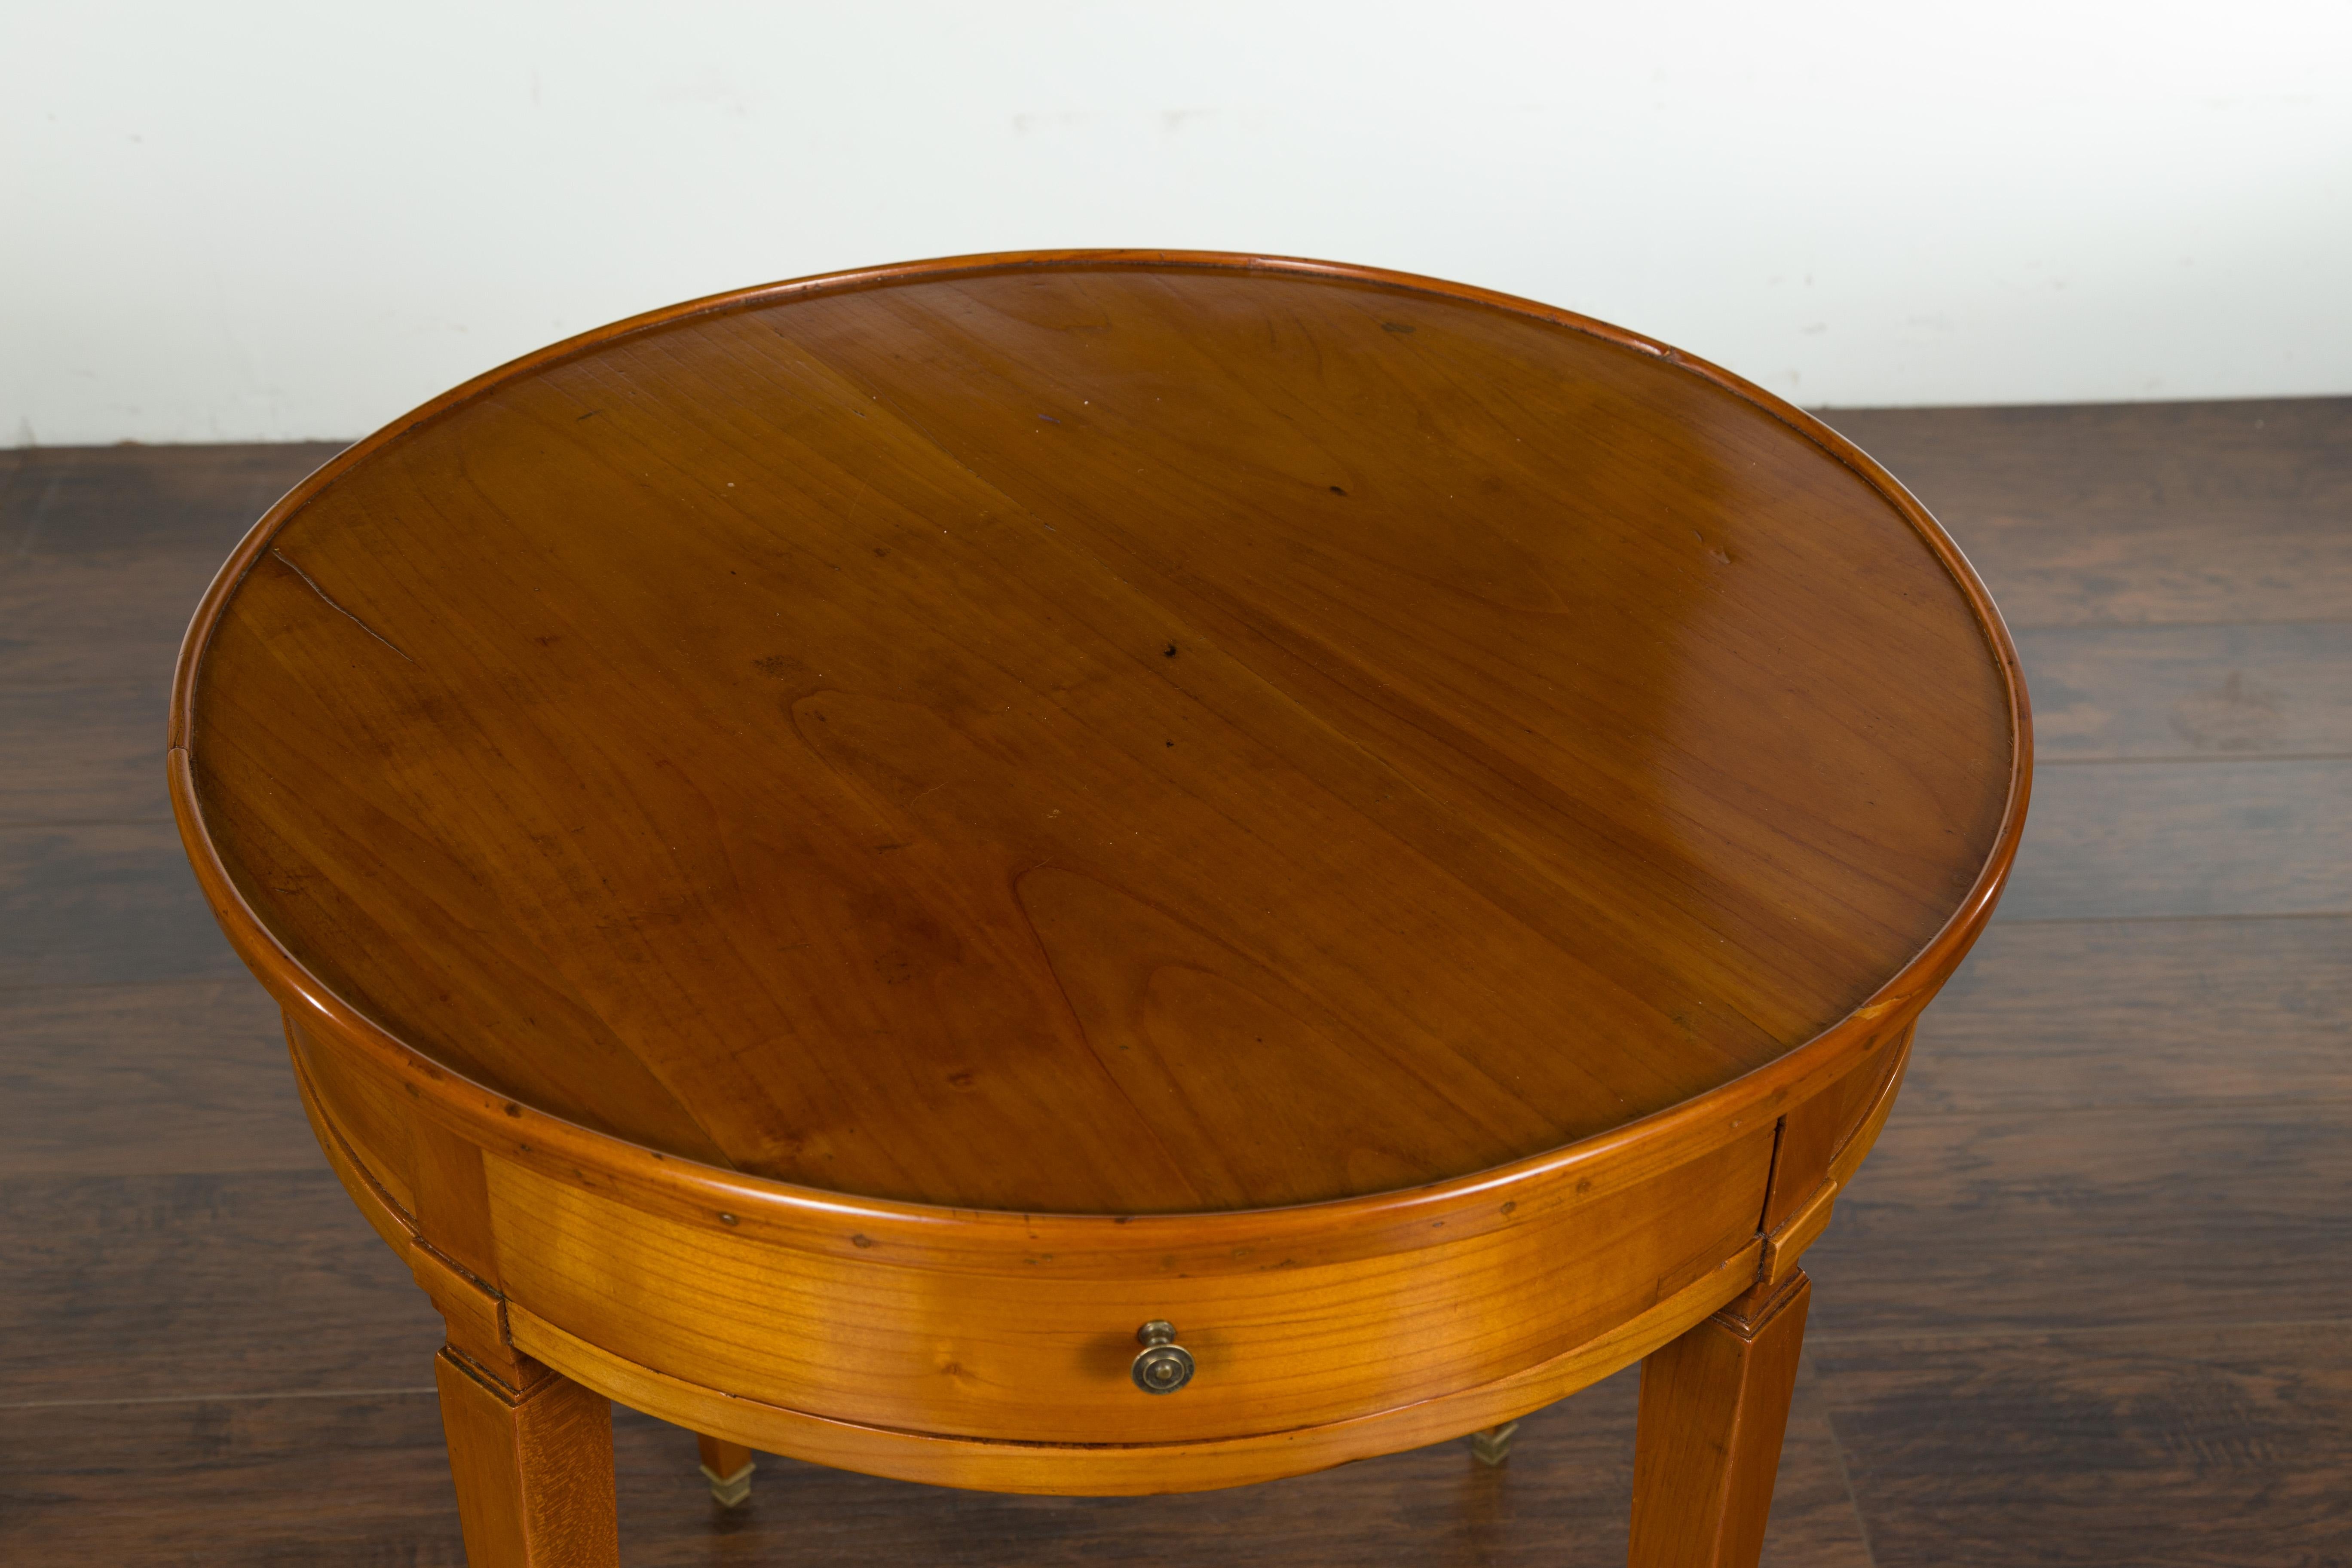 Napoleon III French Napoléon III 1850s Walnut Side Table with Single Drawer and Tapered Legs For Sale